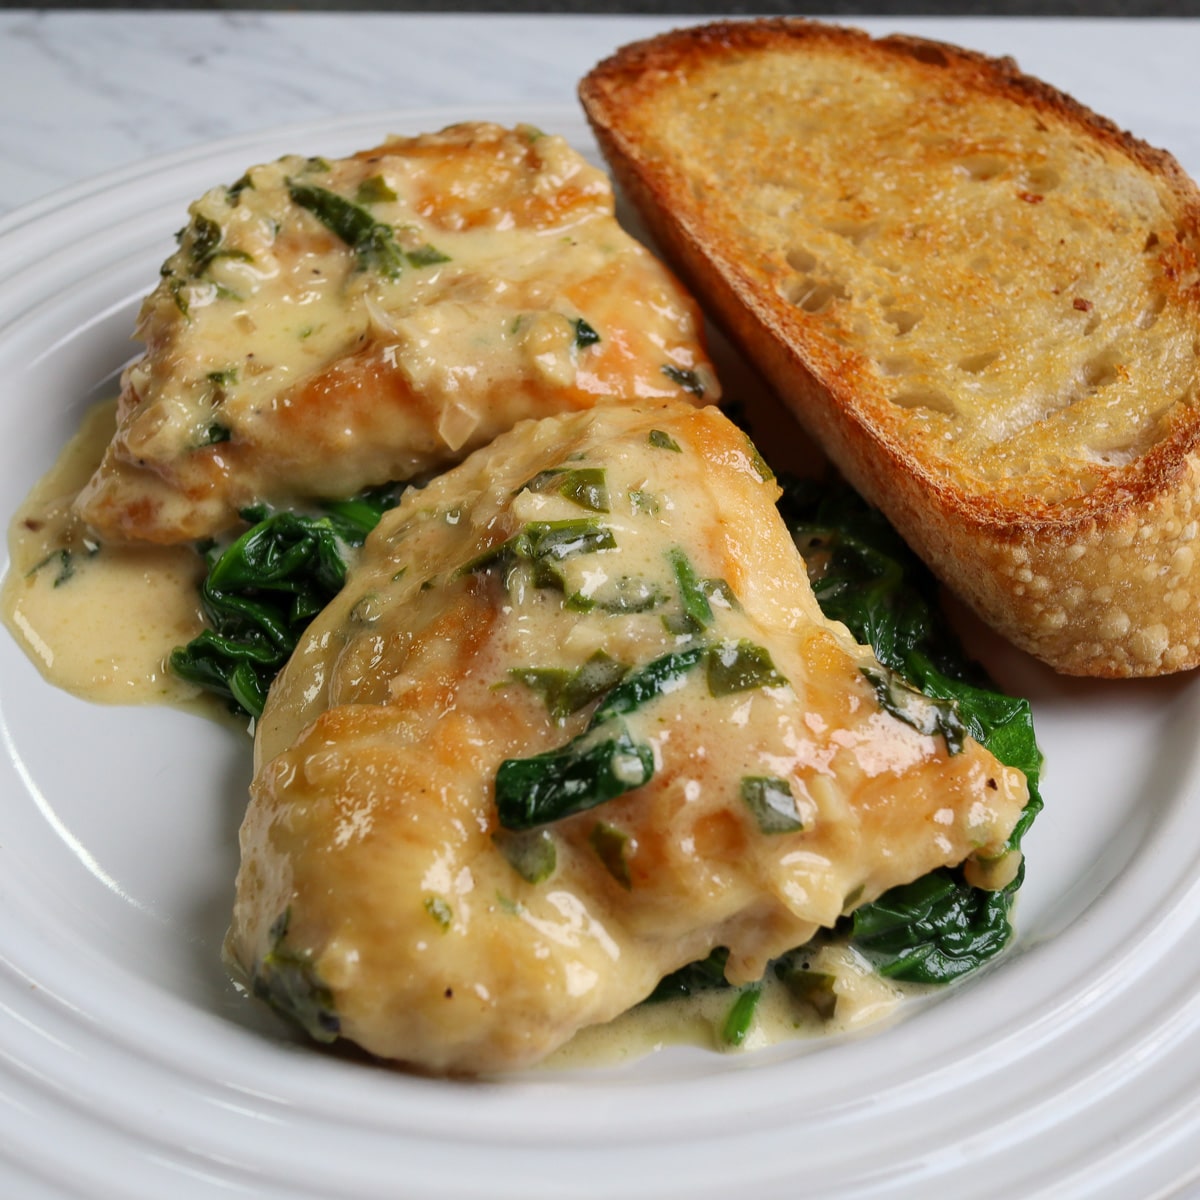 the final chicken florentine dish ready to be eaten on a white plate
